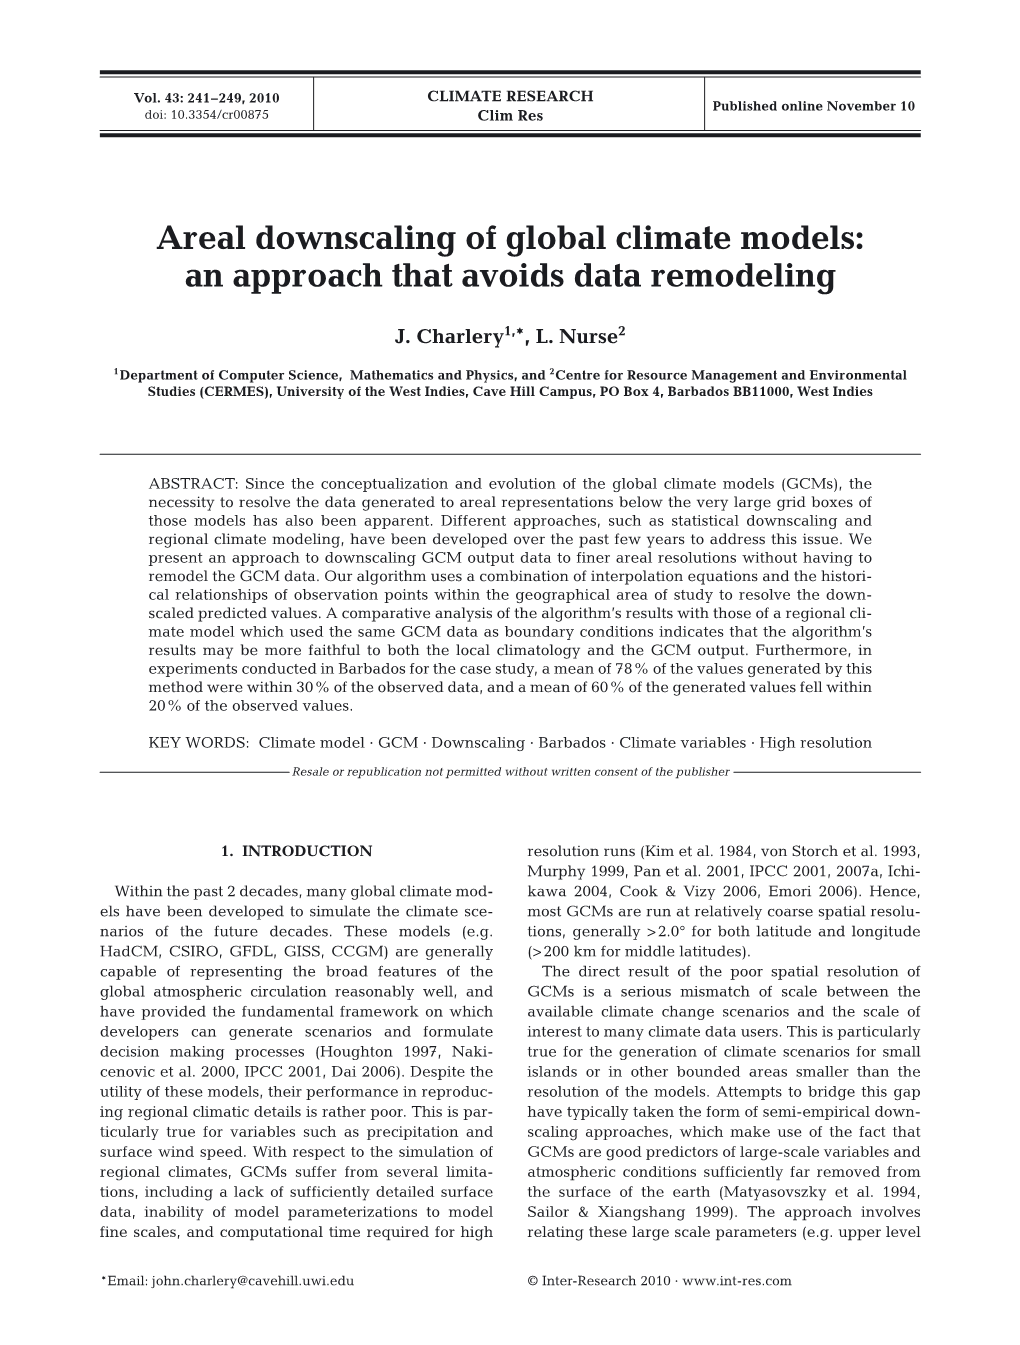 Areal Downscaling of Global Climate Models: an Approach That Avoids Data Remodeling